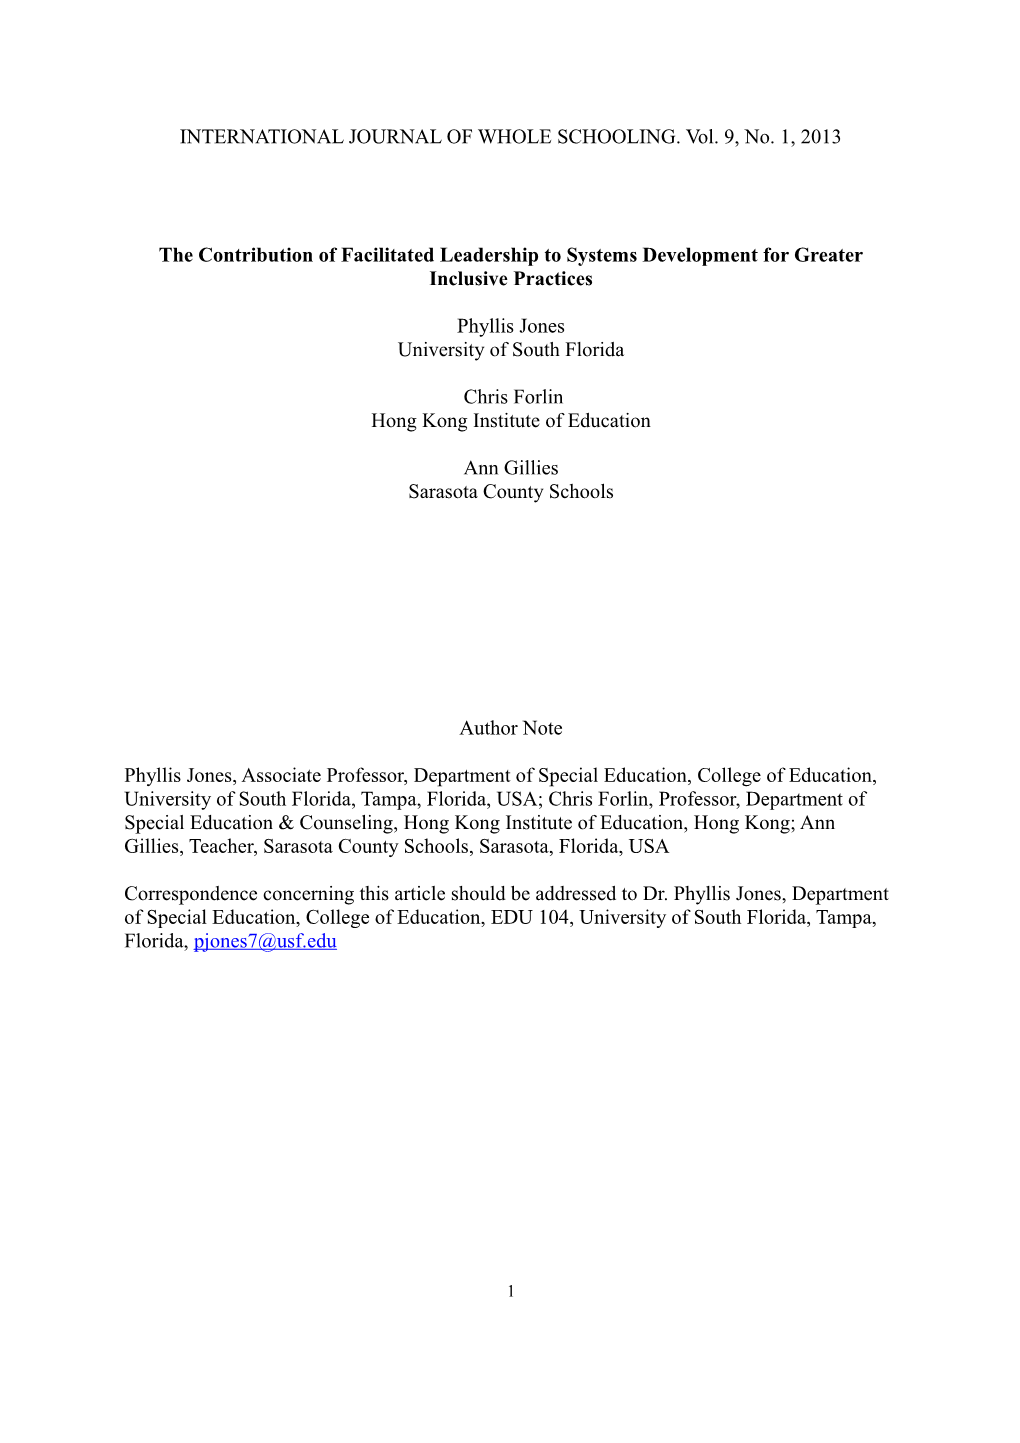 The Contribution of Facilitated Leadership to Systems Development for Greater Inclusive